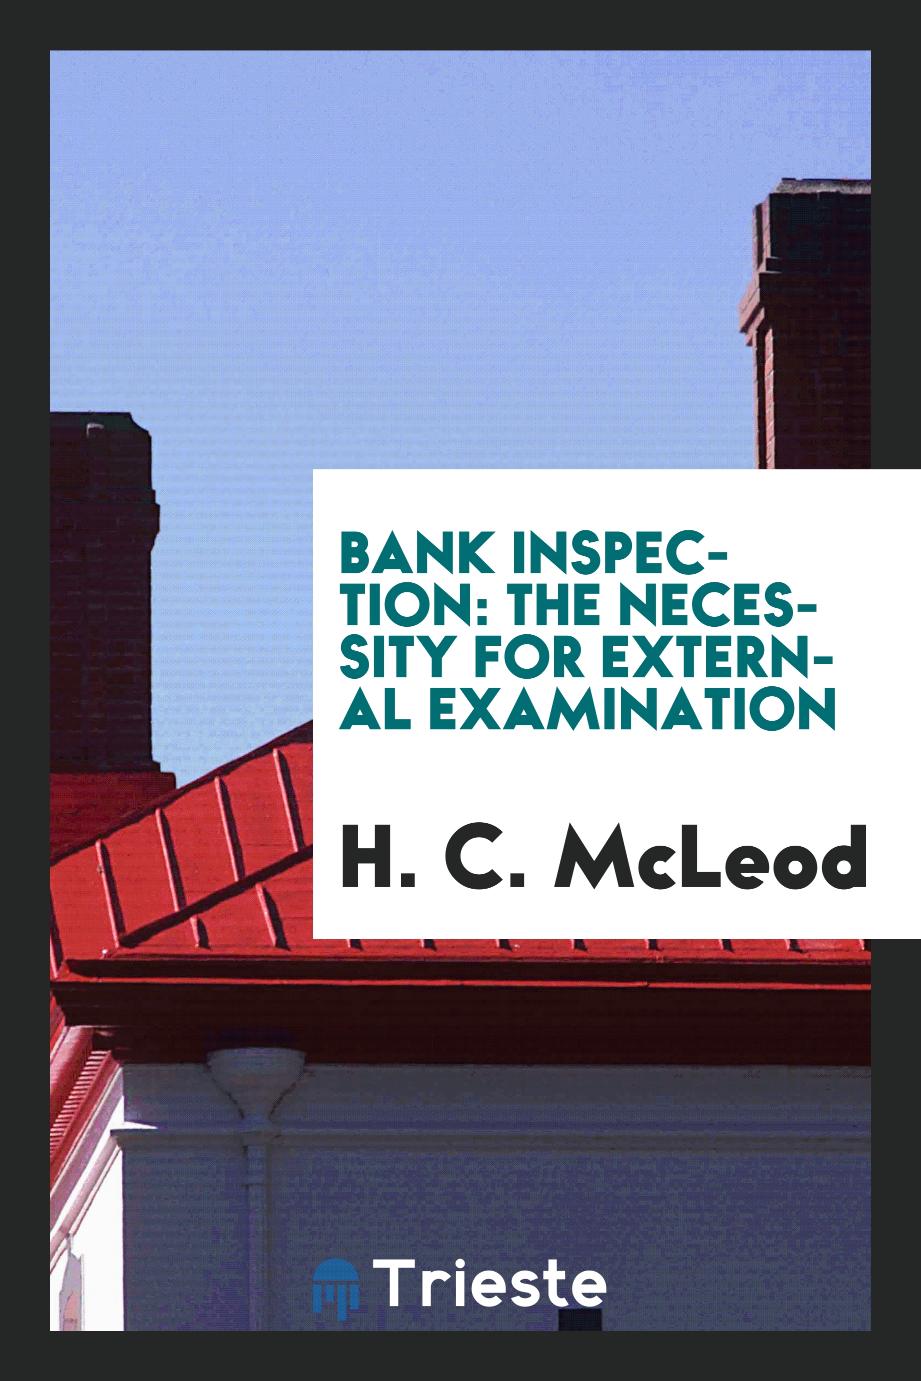 Bank Inspection: The Necessity for External Examination